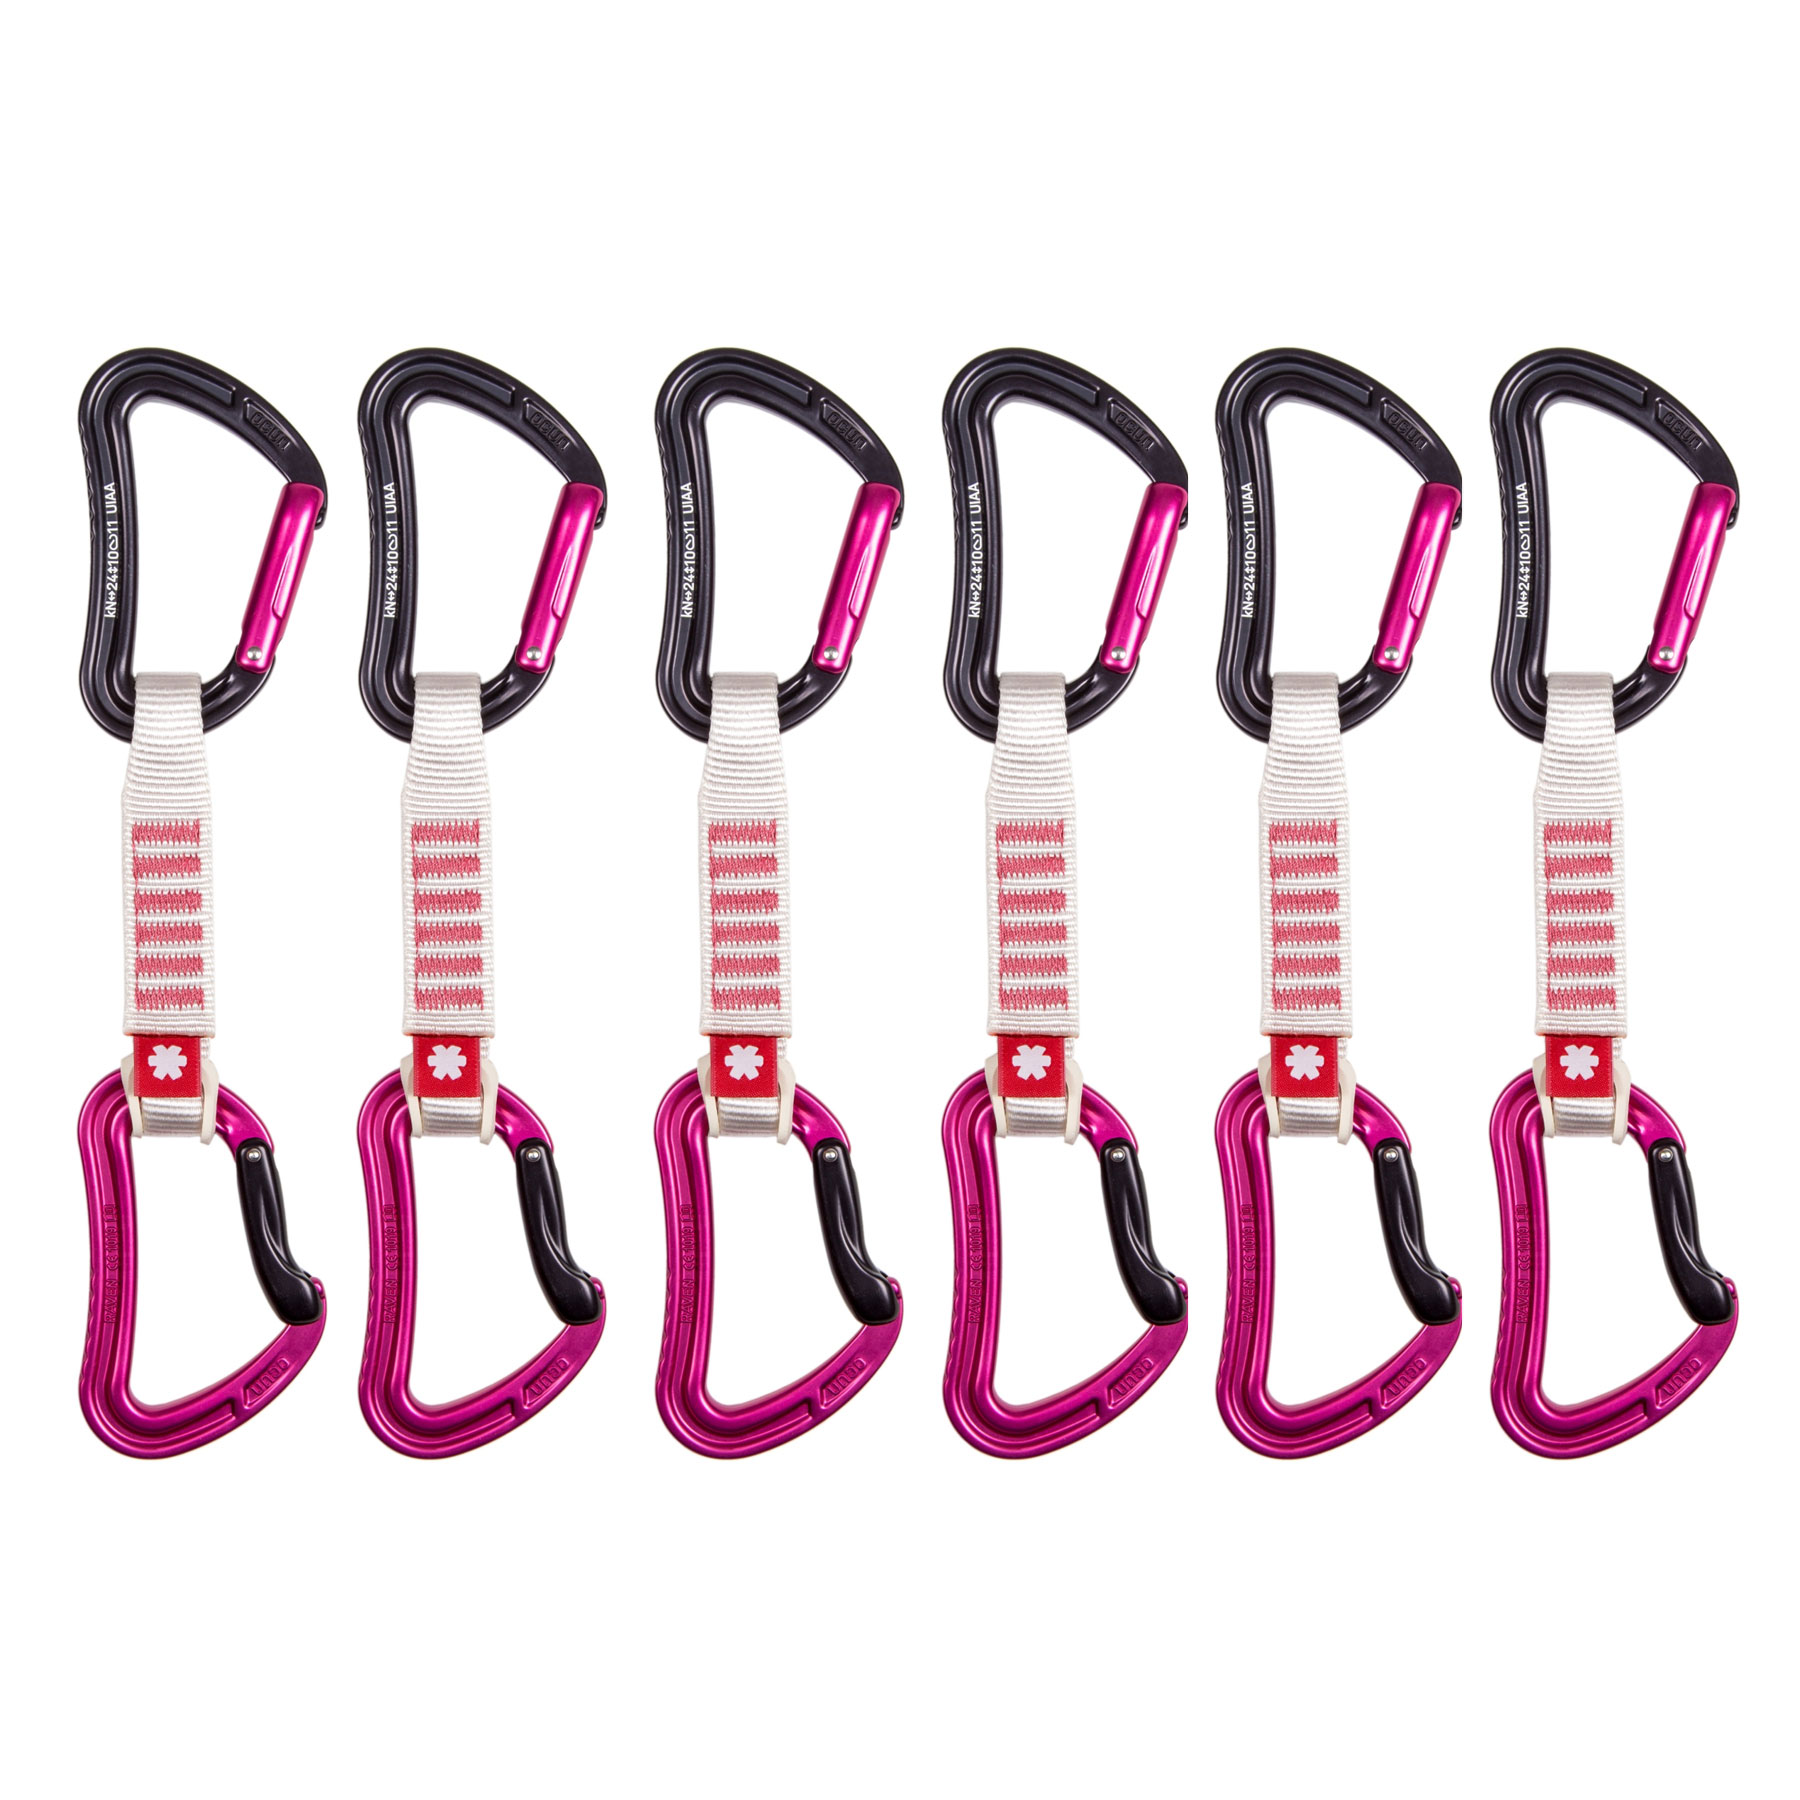 Picture of Ocún Raven QD Zoom Pa 15/22 mm 12 cm Quickdraw Set - 6 Pack - pink